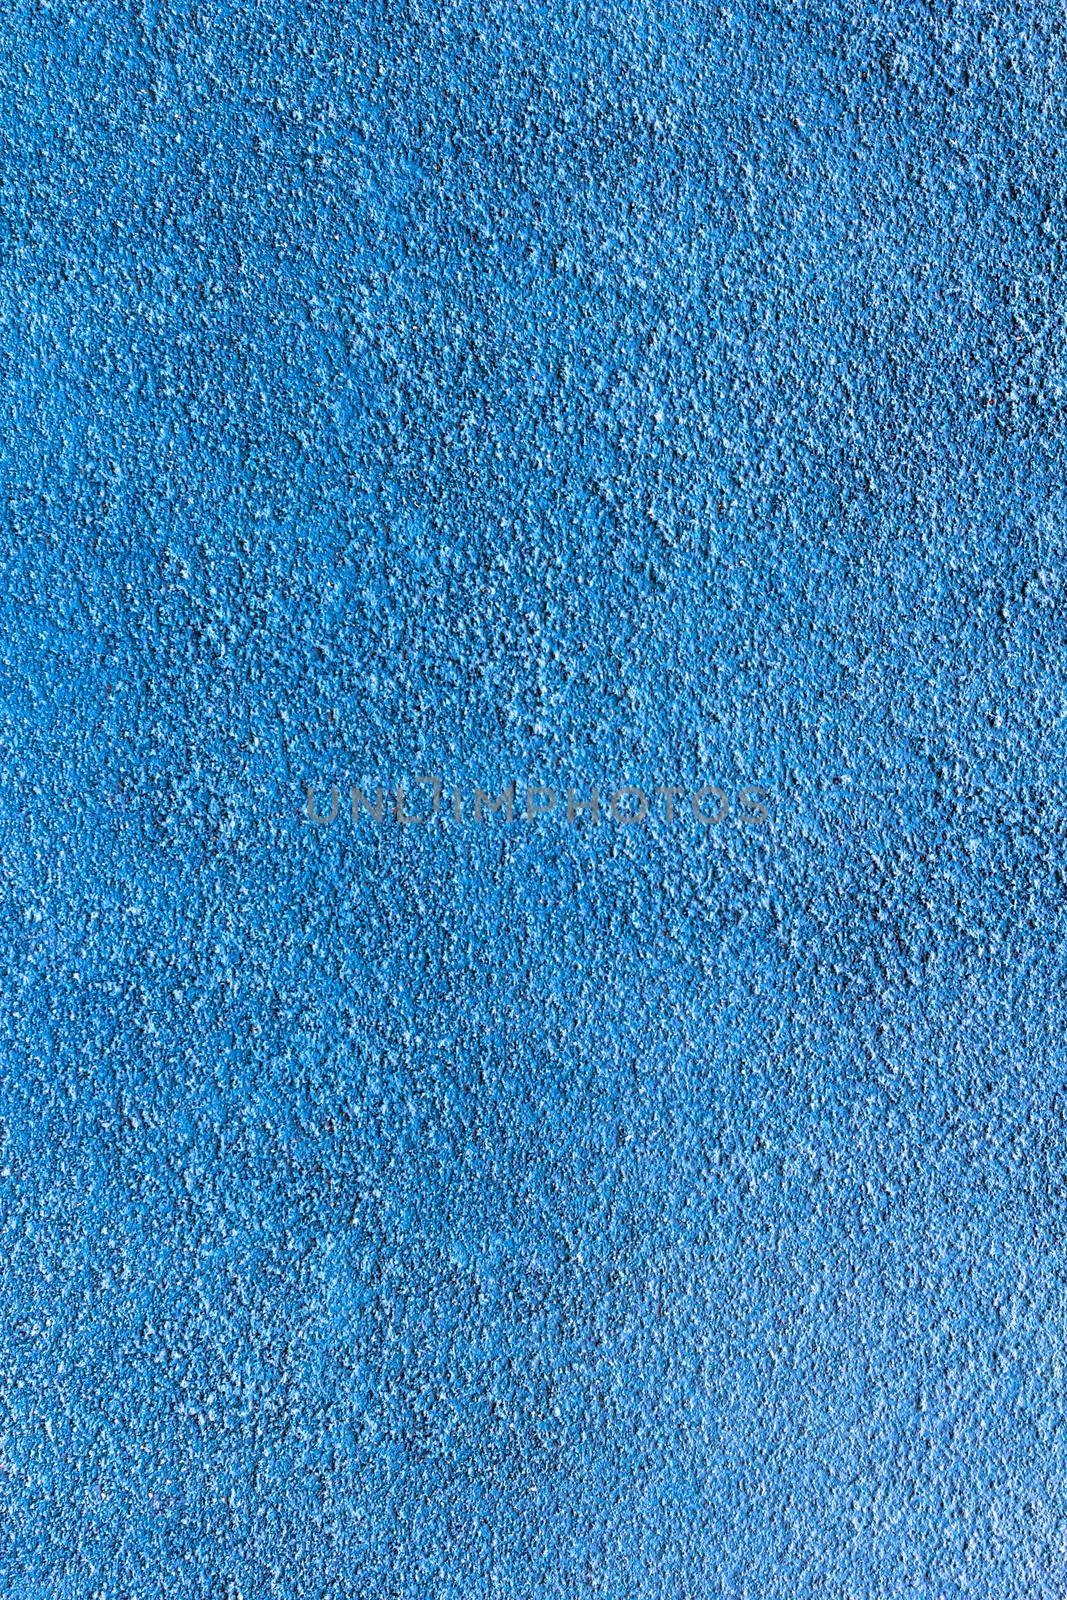 Blue wall texture. It can be used as background.